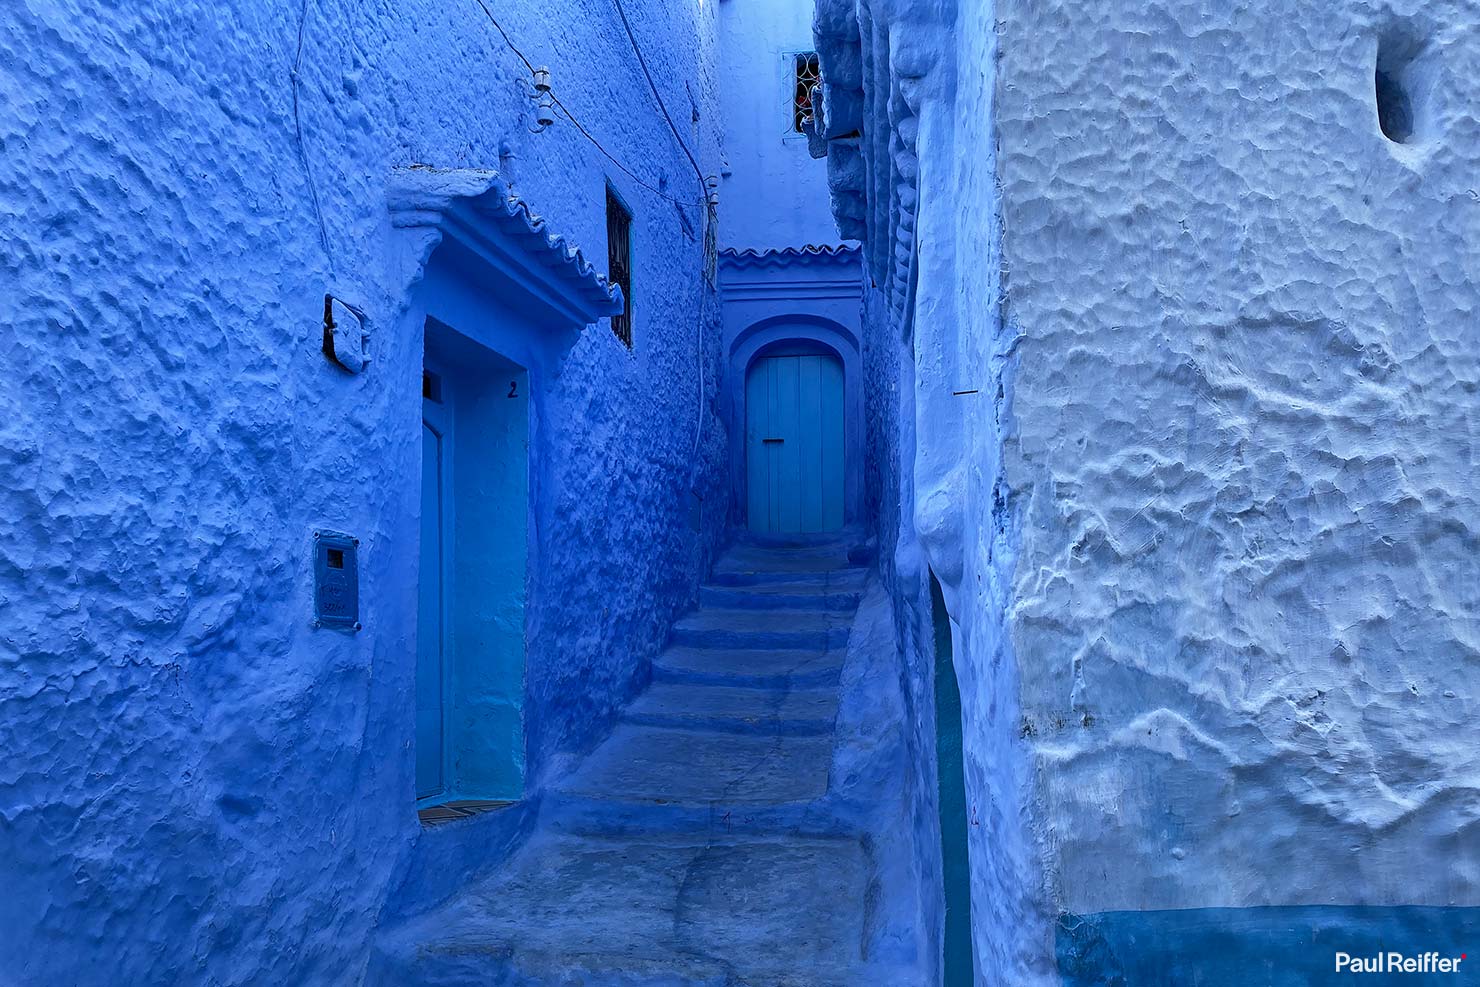 Blue Walls Doorways Alleyway Painted Doors Signs Steps City Visit Chefchaouen Morocco Empty Street Scenes Paul Reiffer Photographer iPhone Travel Apple Landscape Photography